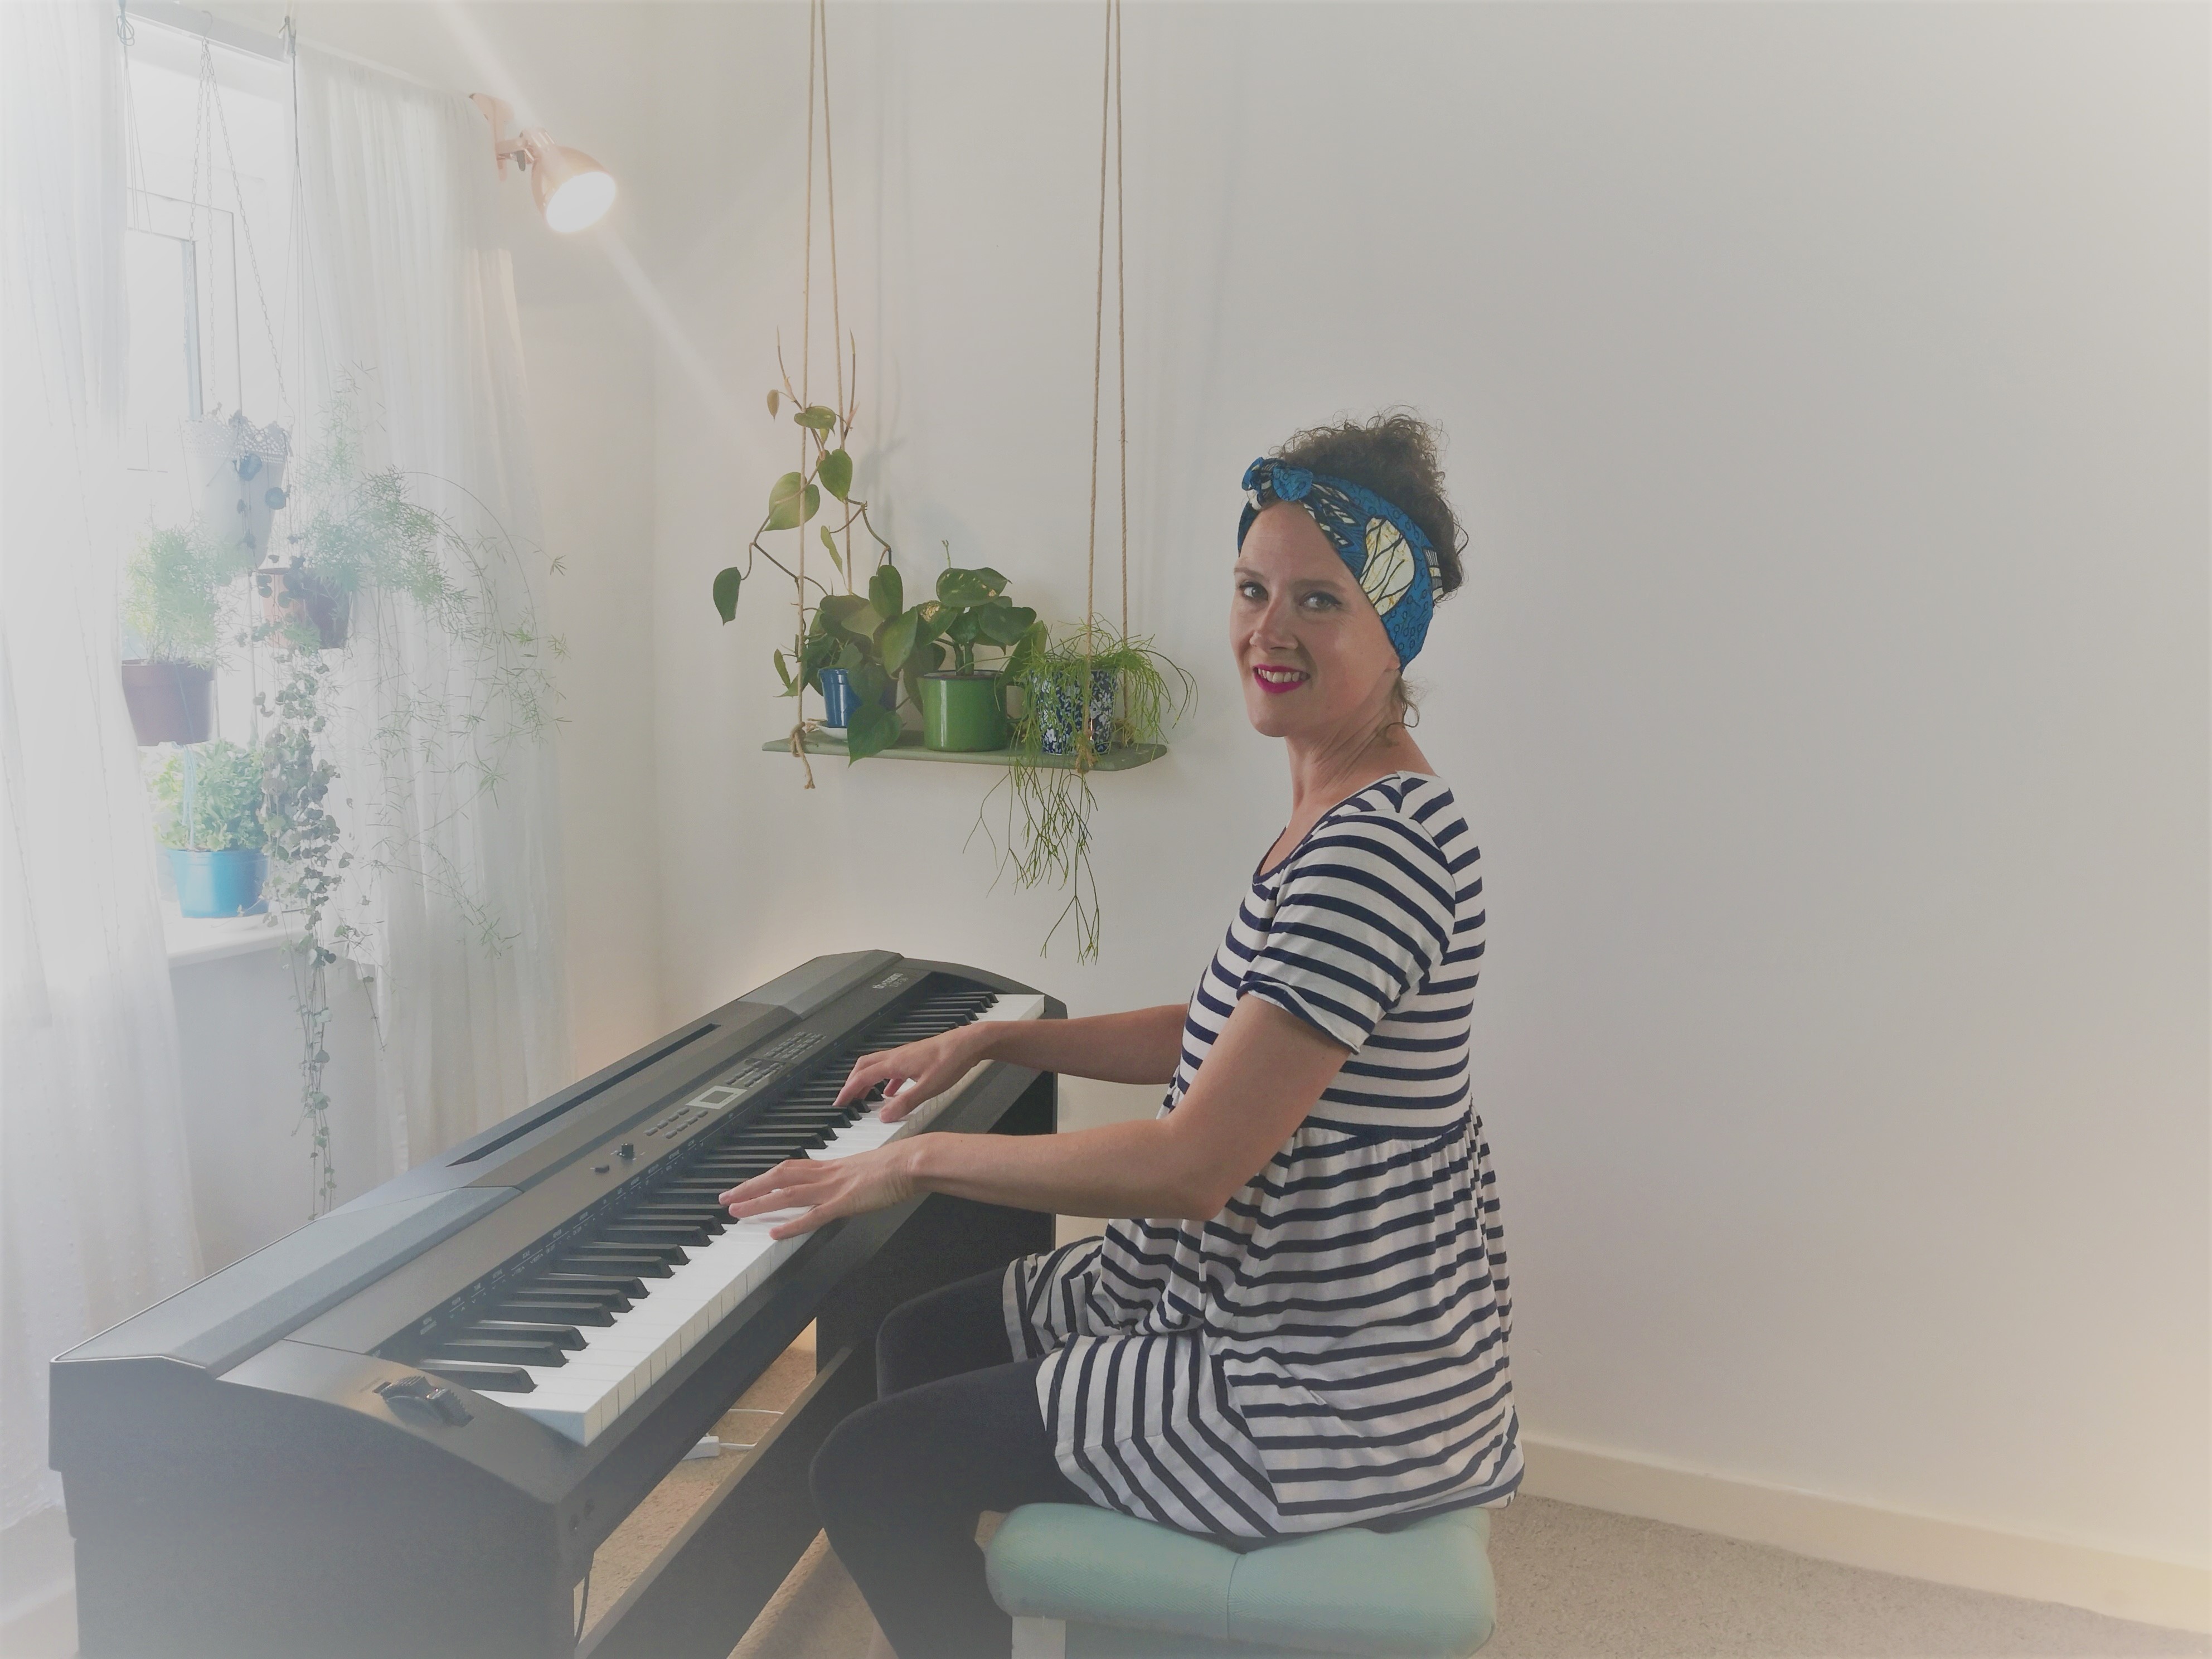 Piano for wellbeing